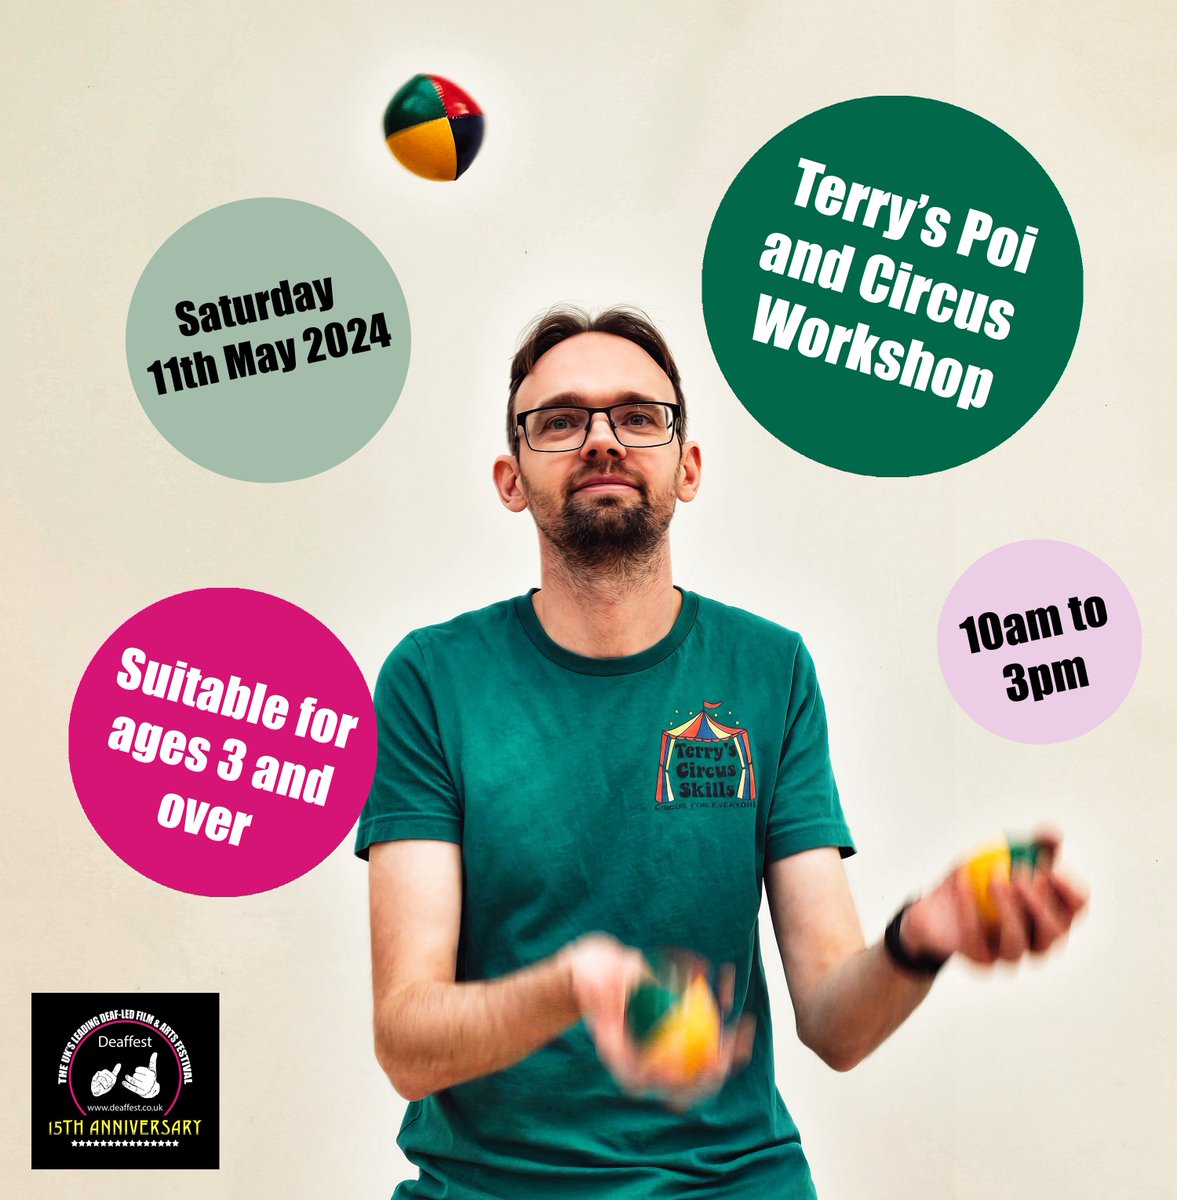 Learn how to juggle, spin poi, hula hoop, use diabolo + flower sticks with Terry’s Poi and Circus! Hands-on and inclusive workshop where you can learn new skills, build confidence & have lots of fun! 11th May | @wlv_uni | No pre-booking required #Deaffest #tuneintodeaffests15th